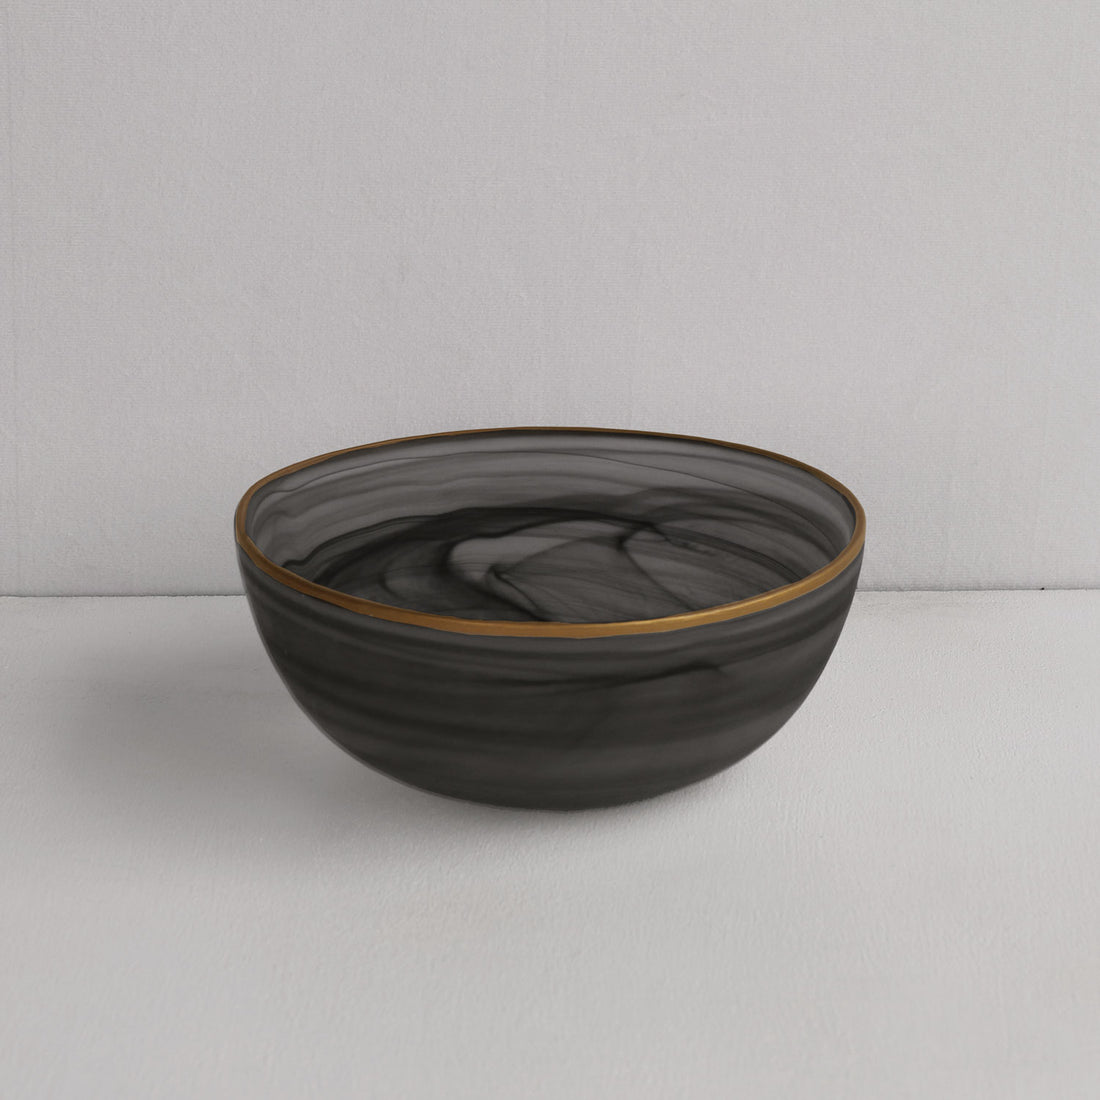 GLASS Frosted Black Alabaster Medium Bowl with Gold Rim (Black and Gold)